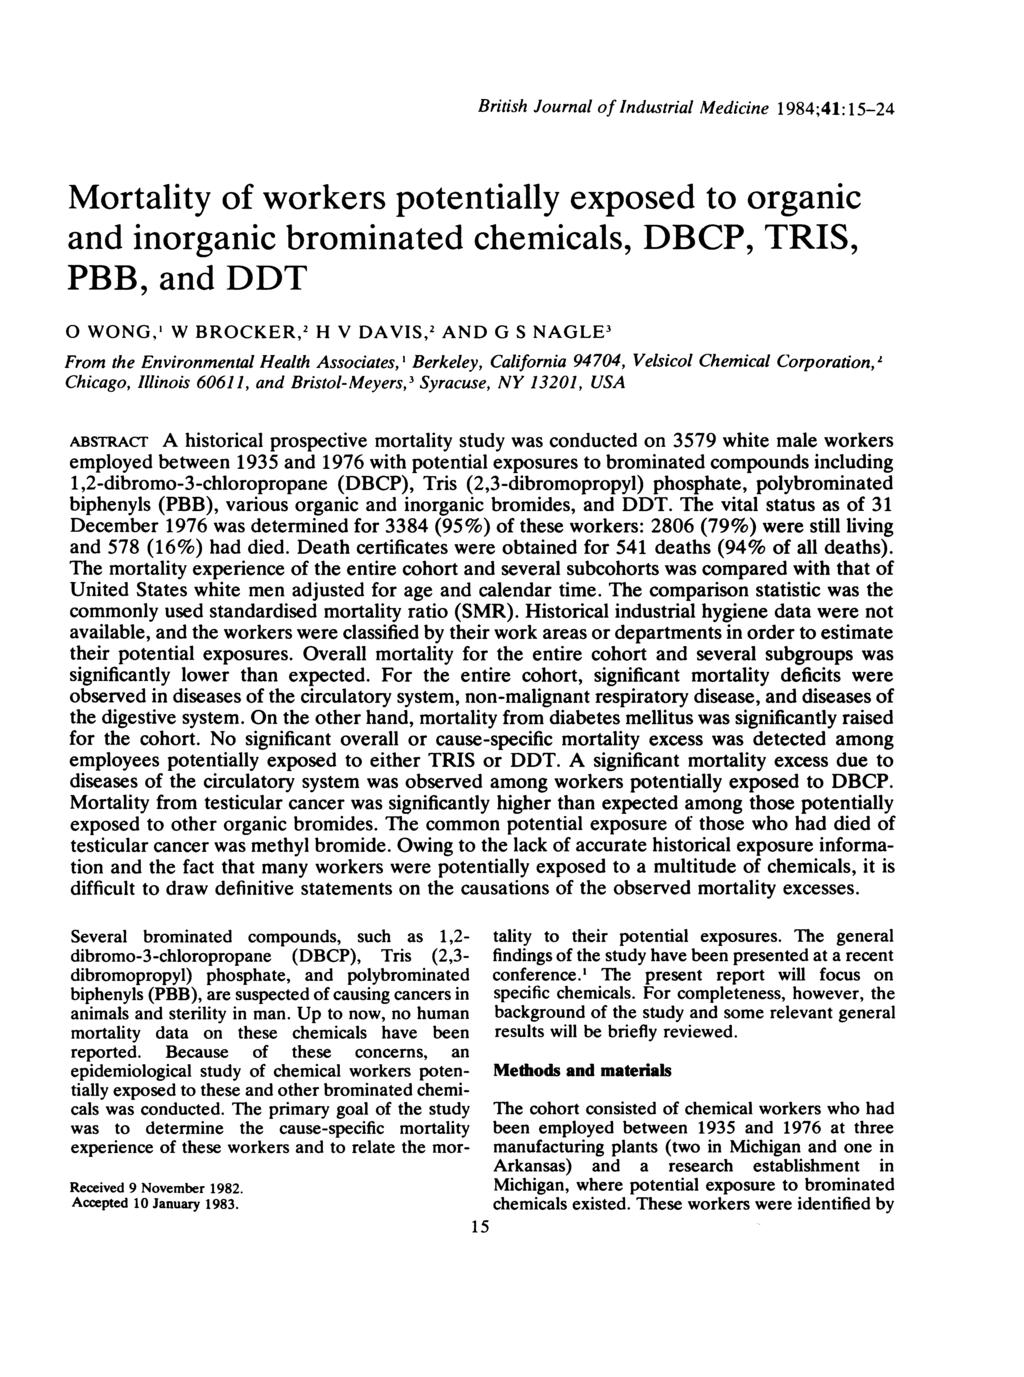 British Journal of Industrial Medicine 1984;41: 15-24 Mortality of workers potentially exposed to organic and inorganic brominated chemicals, DBCP, TRIS, PBB, and DDT 0 WONG,' W BROCKER,2 H V DAVIS,2